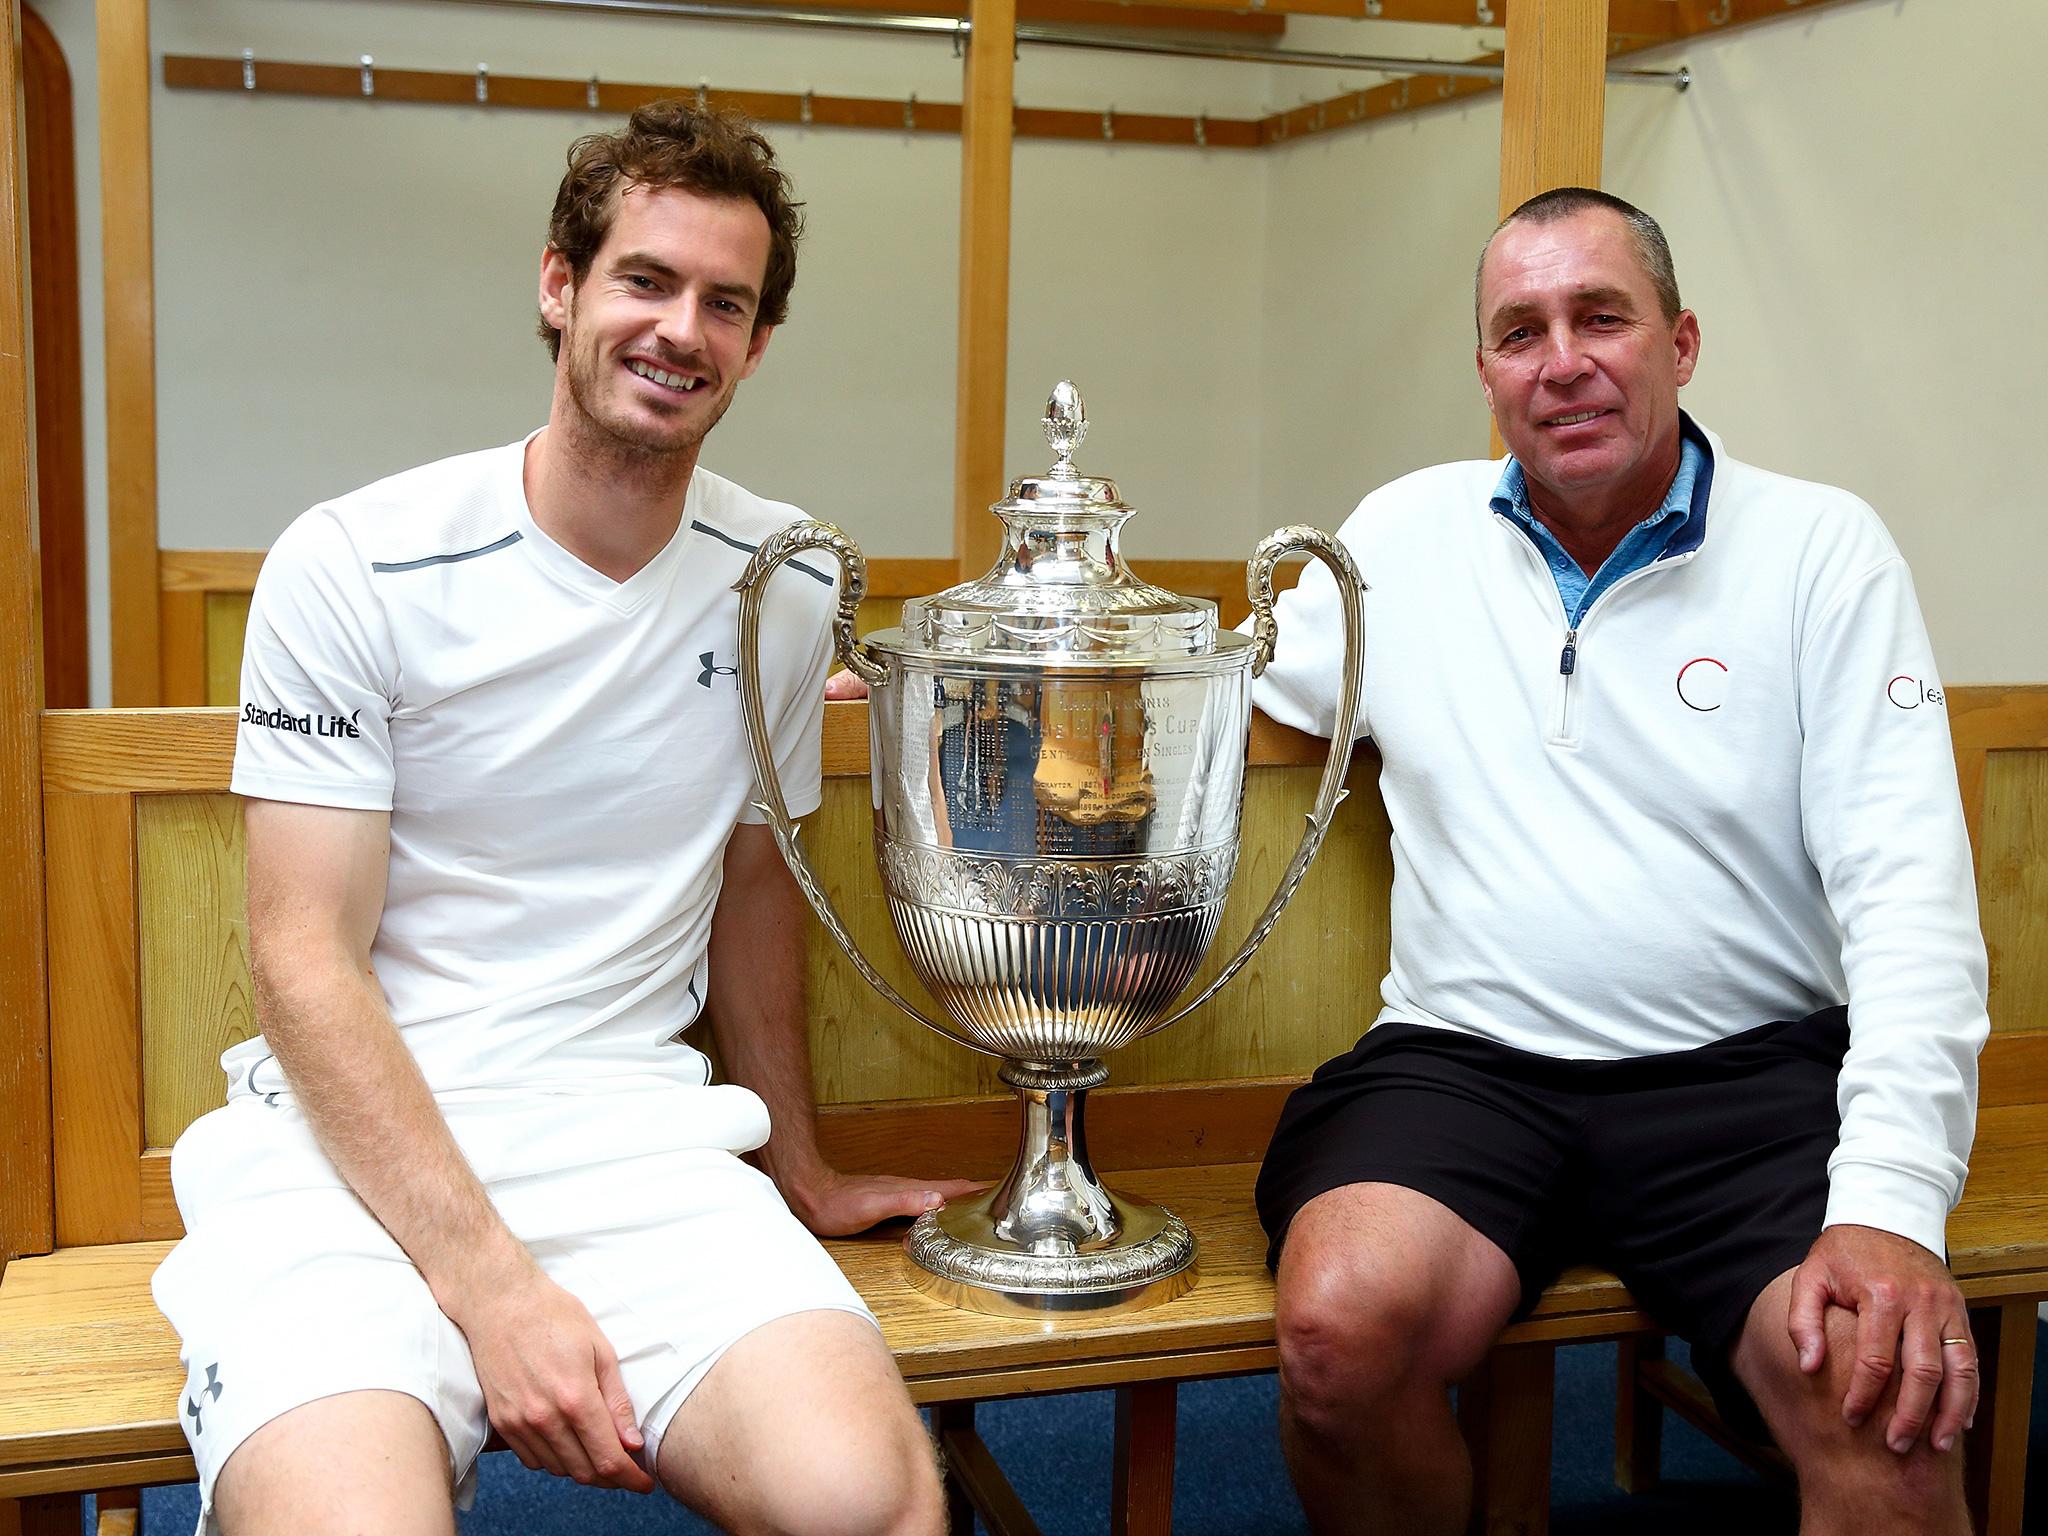 Murray poses with Lendl after winning the Aegon Championship at Queen's